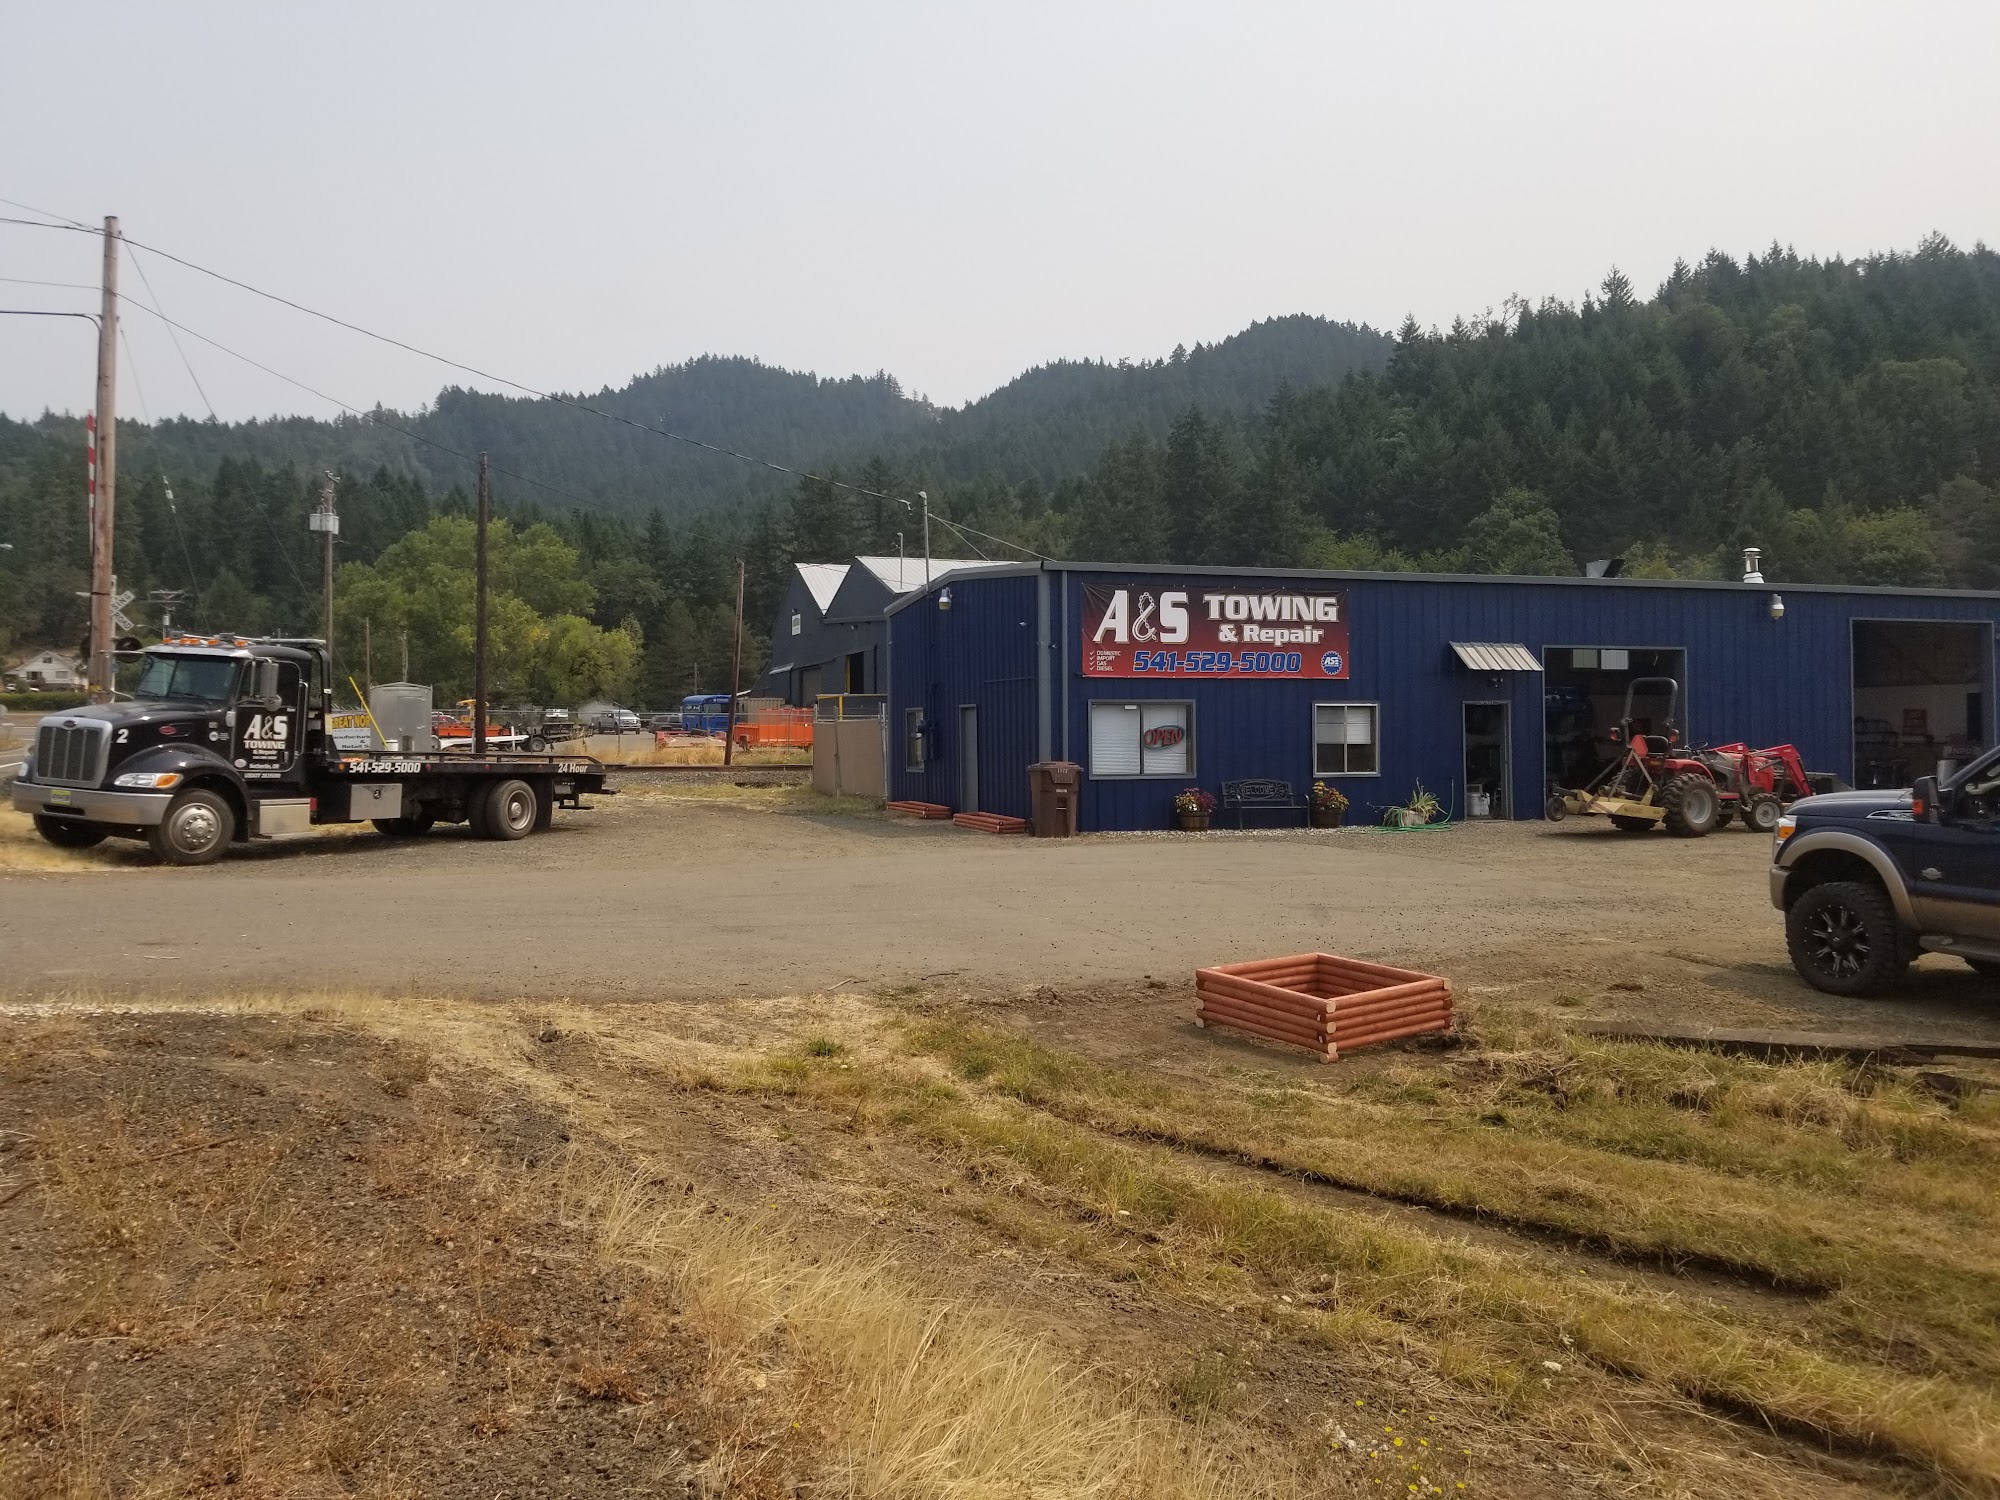 A&S Towing and Repair LLC 1378 S Calapooia St, Sutherlin Oregon 97479